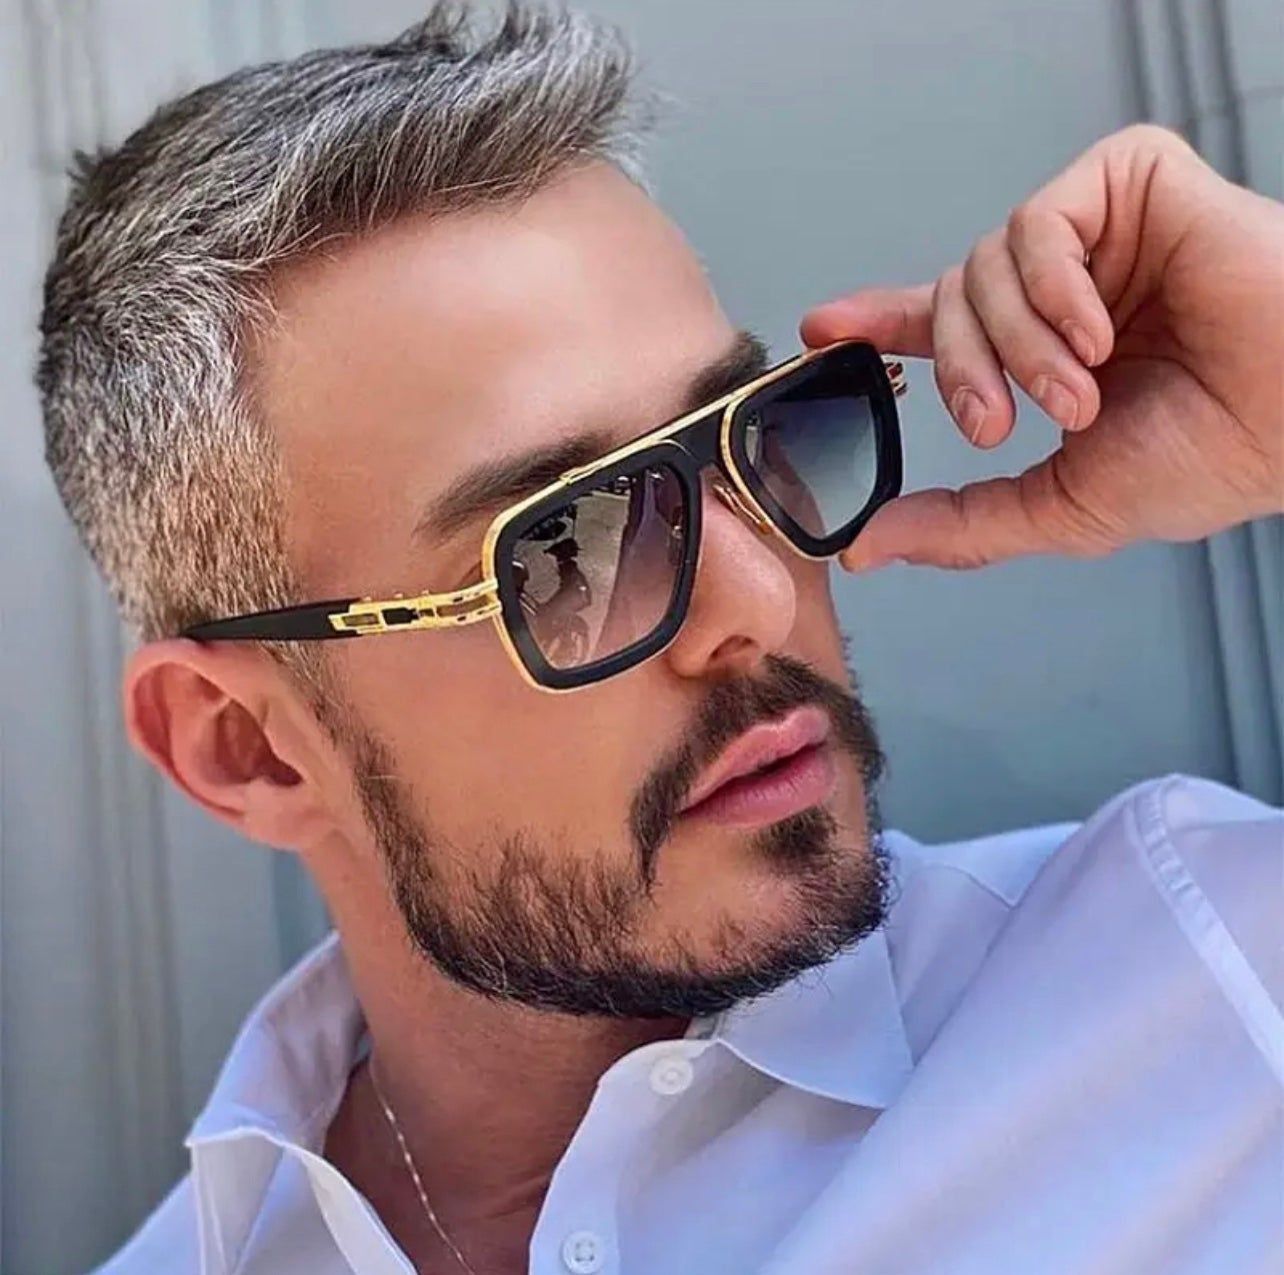 MILLIONAIRE Designer Square Sunglasses For Men For Men And Women UV  Protection, Gradient Eyewear With Original Box From Fashion1999go, $12.77